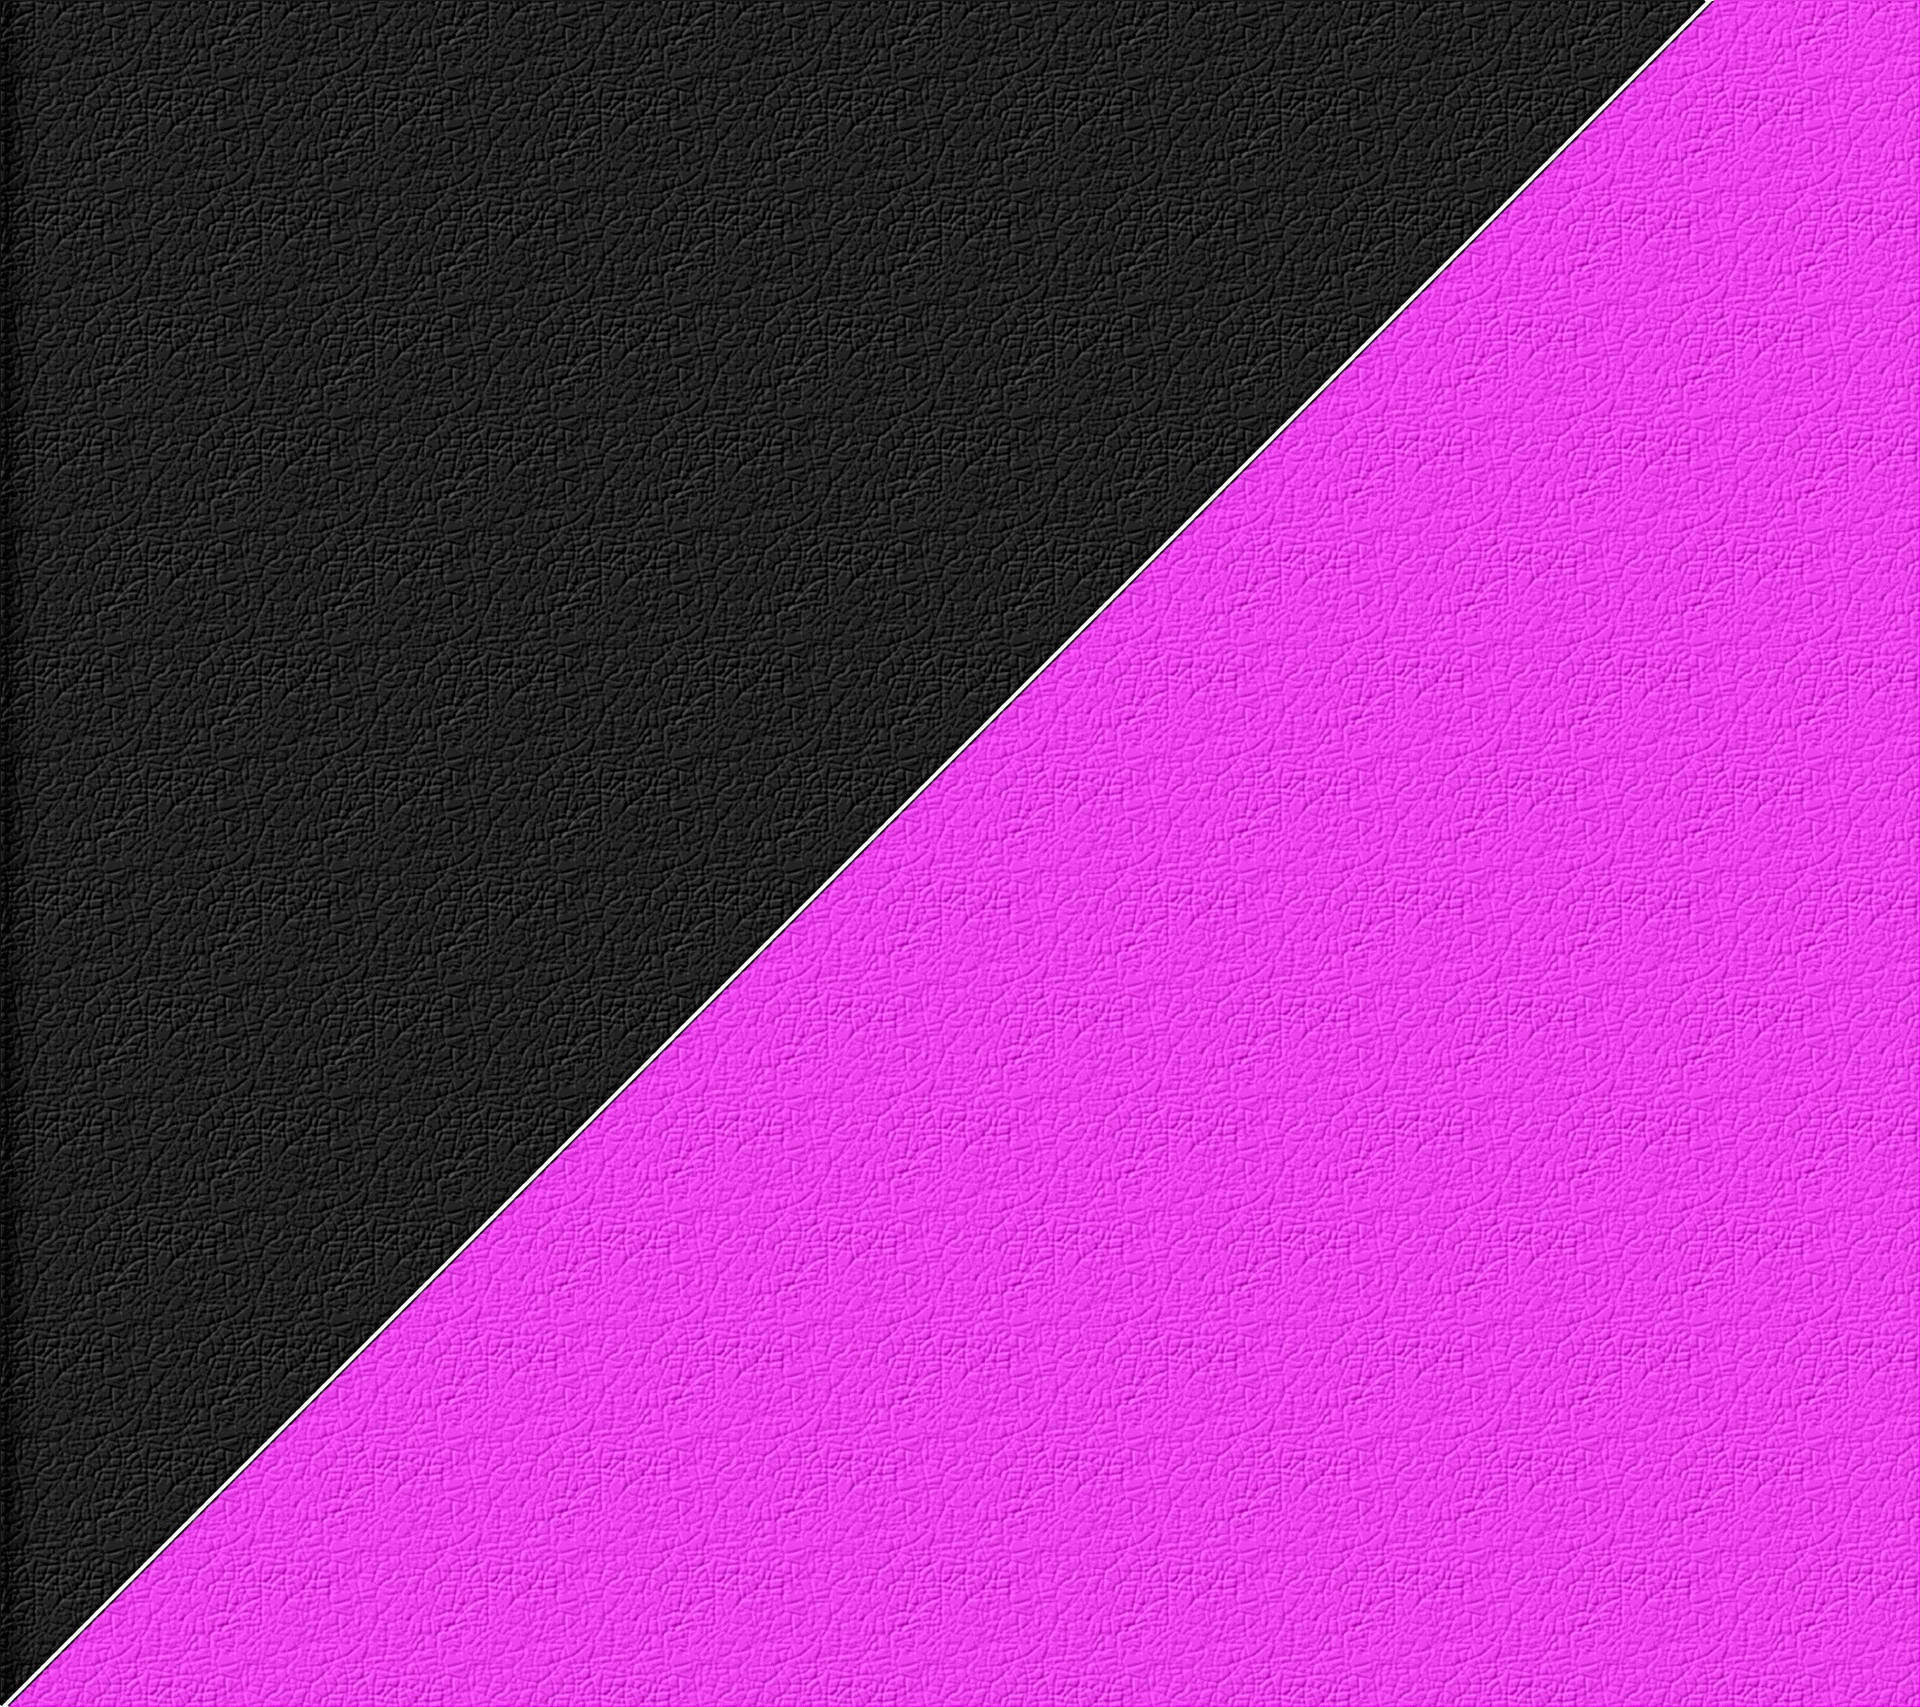 Black And Pink Aesthetic Leather Texture